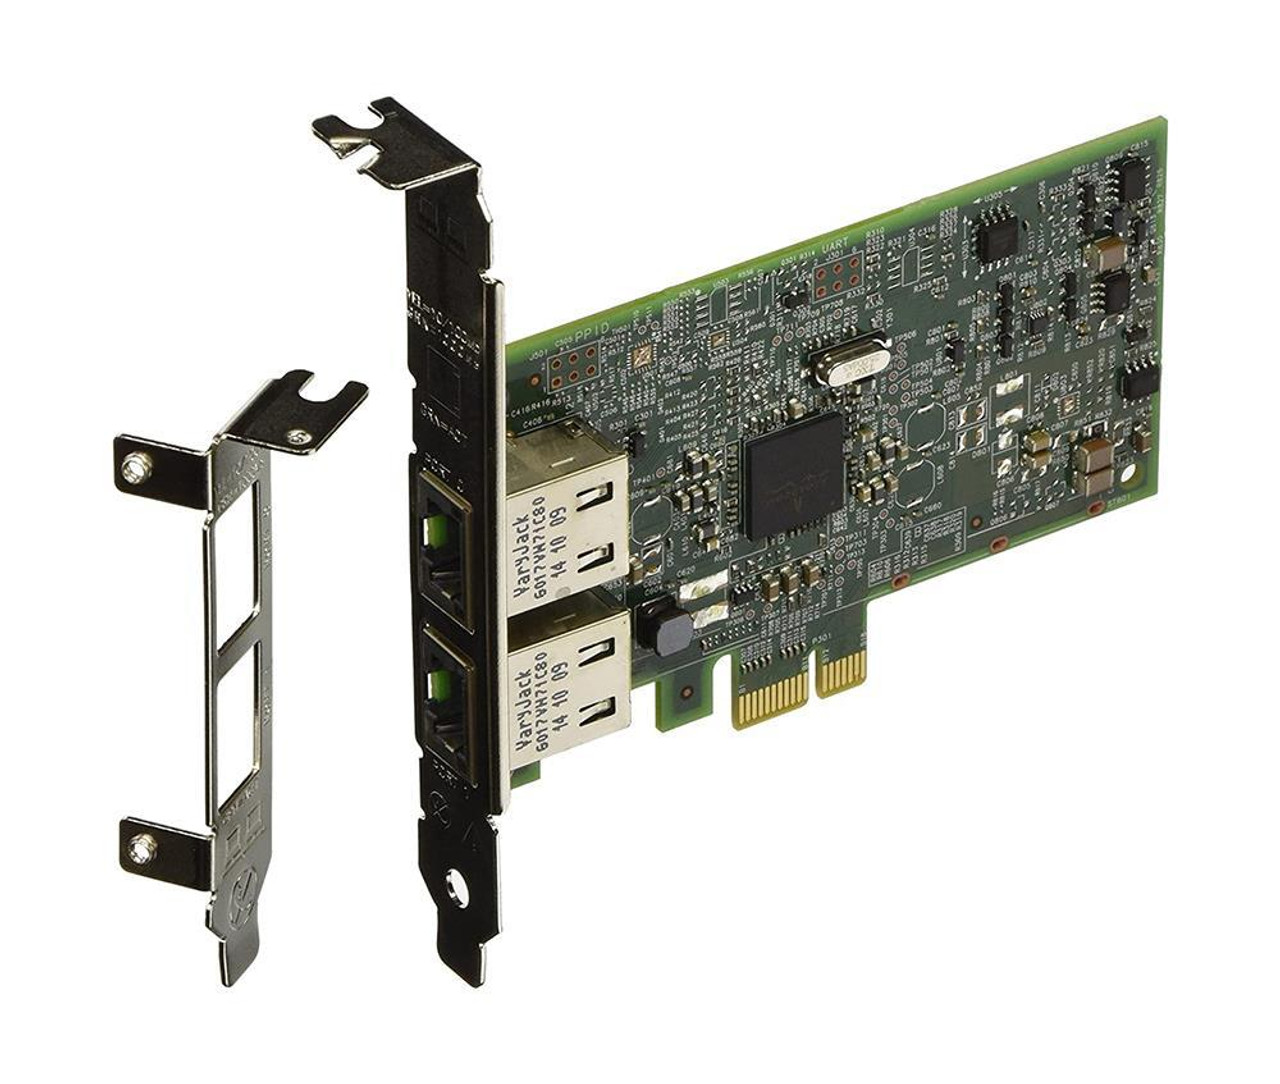 90Y9370 IBM NetXtreme I Dual-Ports RJ-45 1Gbps 10Base-T/100Base-TX/1000Base-T Gigabit Ethernet PCI Express Network Adapter by Broadcom for System x